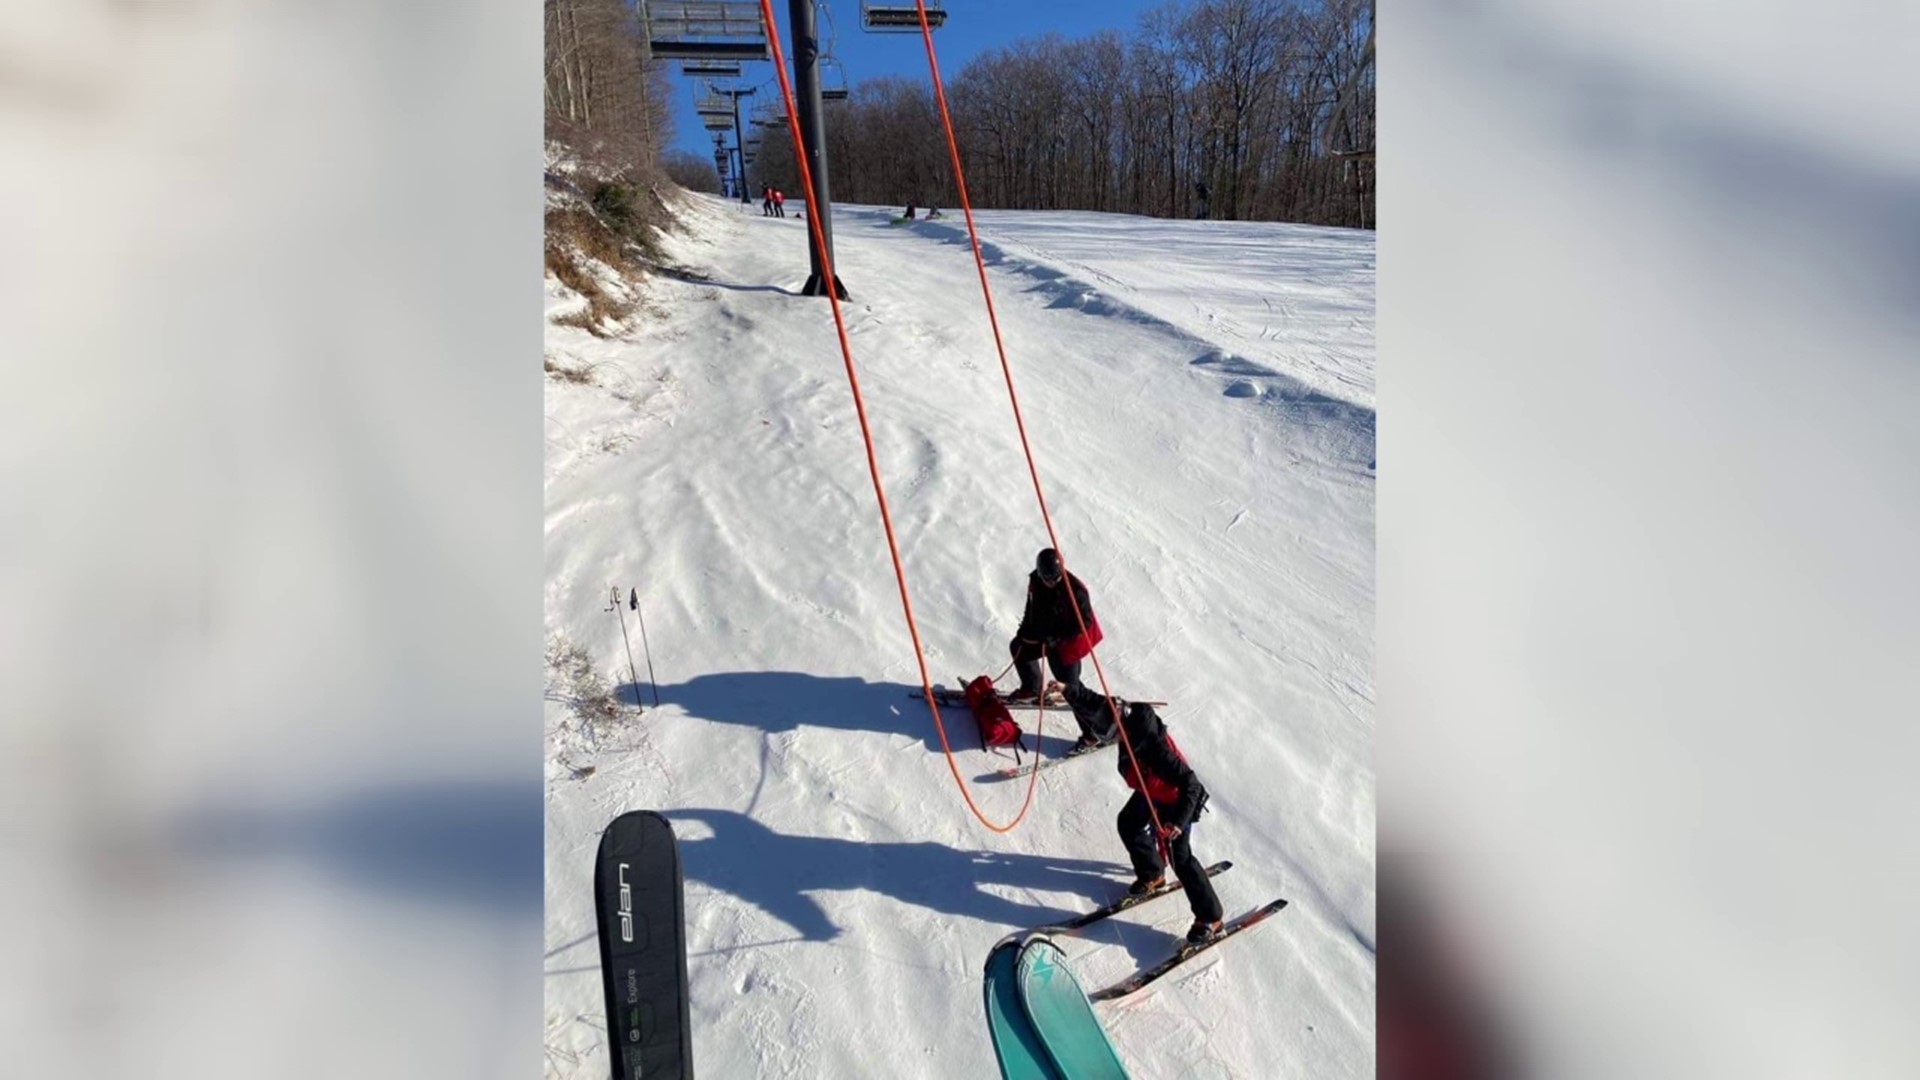 Similar to incidents at Elk Mountain Ski Resort, a chair lift at Montage Mountain malfunctioned on Sunday, causing the evacuation of guests.